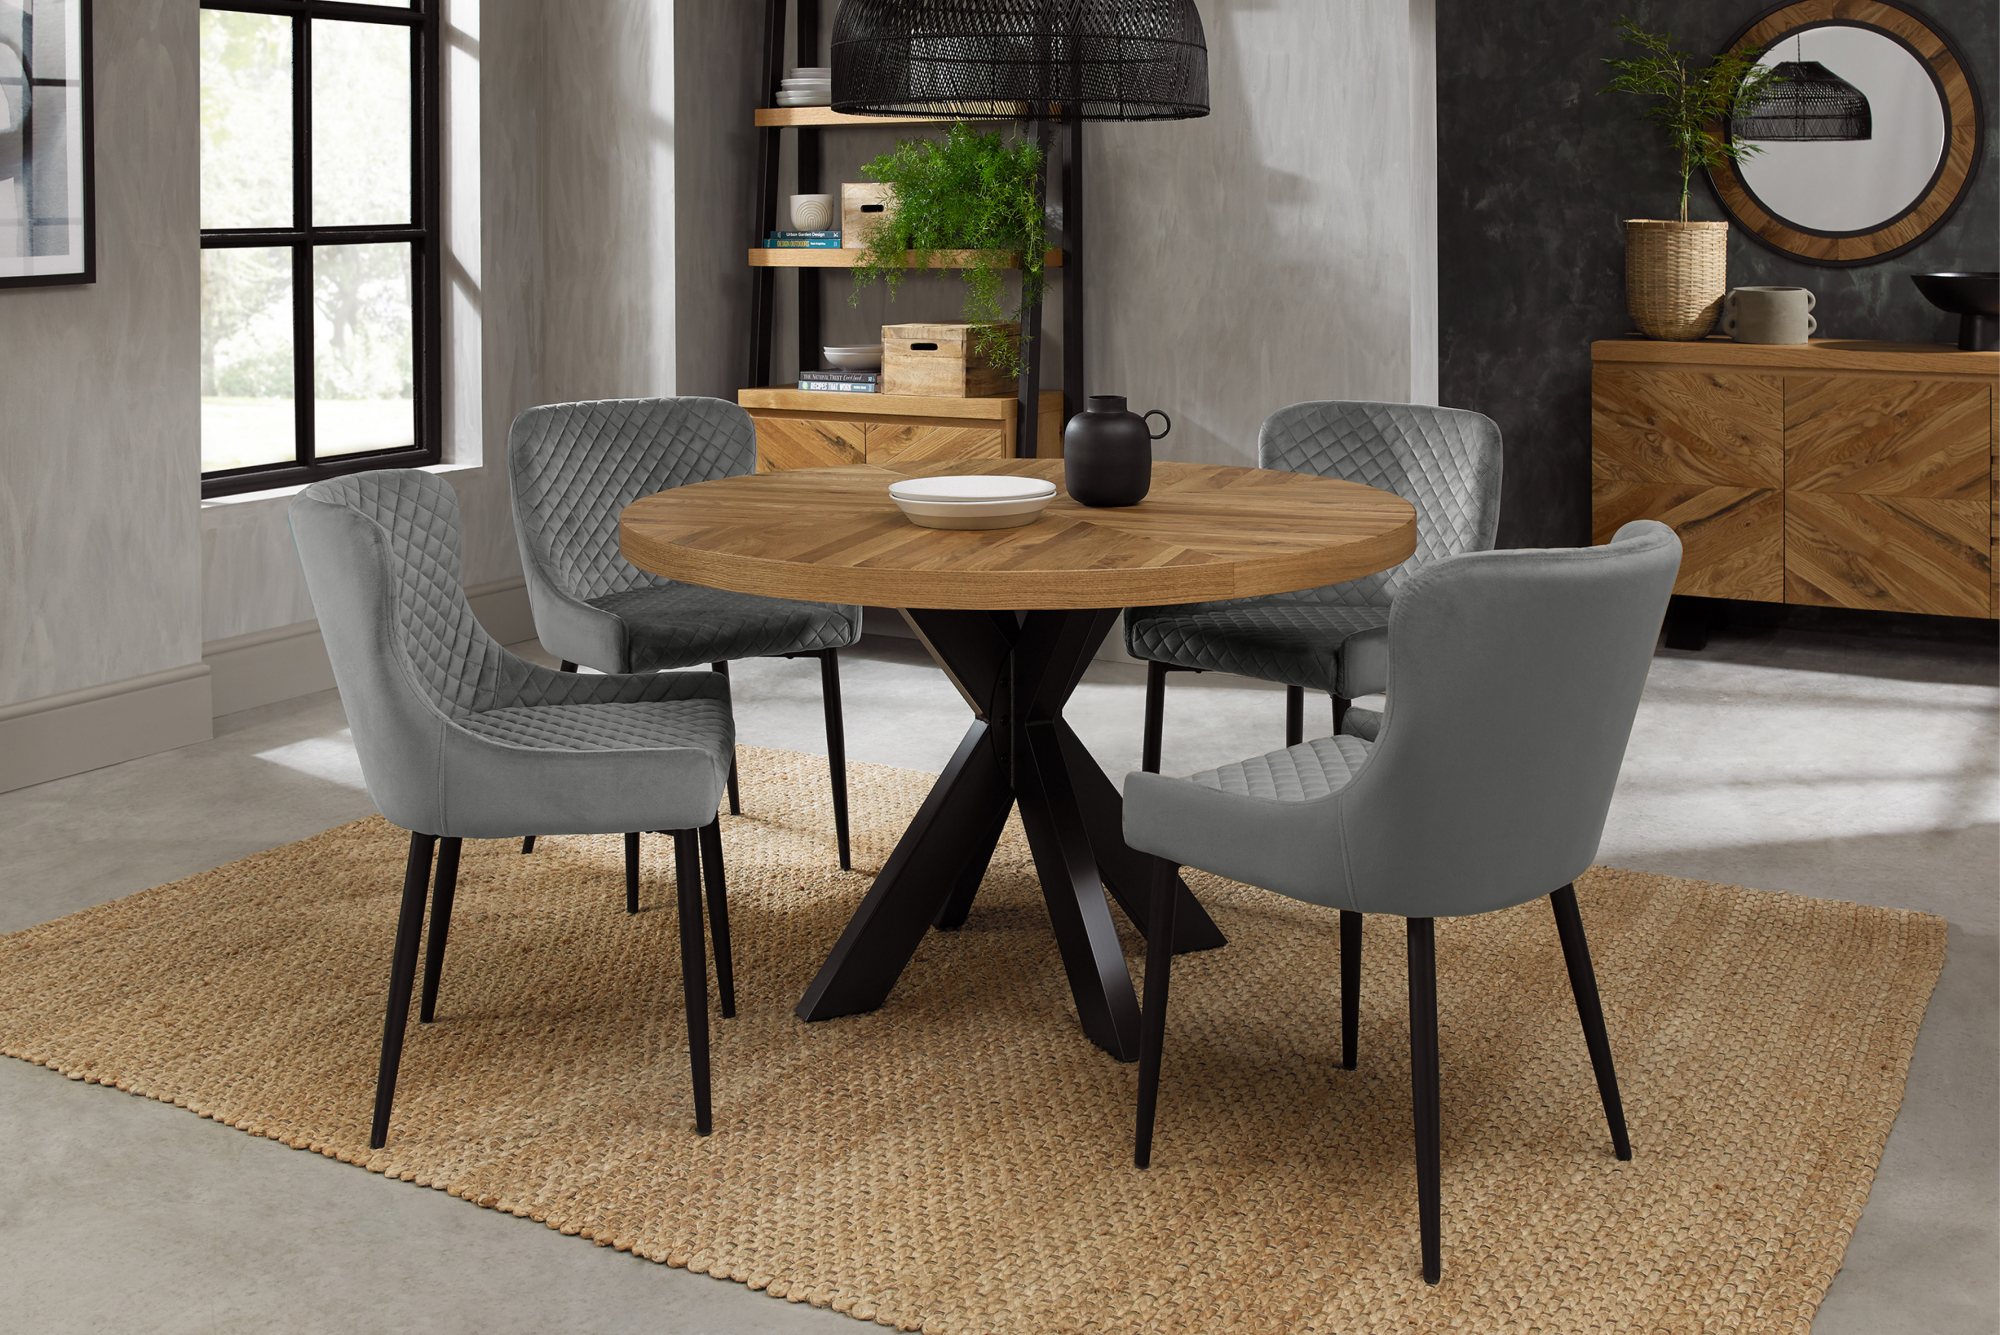 Home Origins Bosco Rustic Oak 4 seater dining table with 4 Cezanne chairs- grey velvet fabric